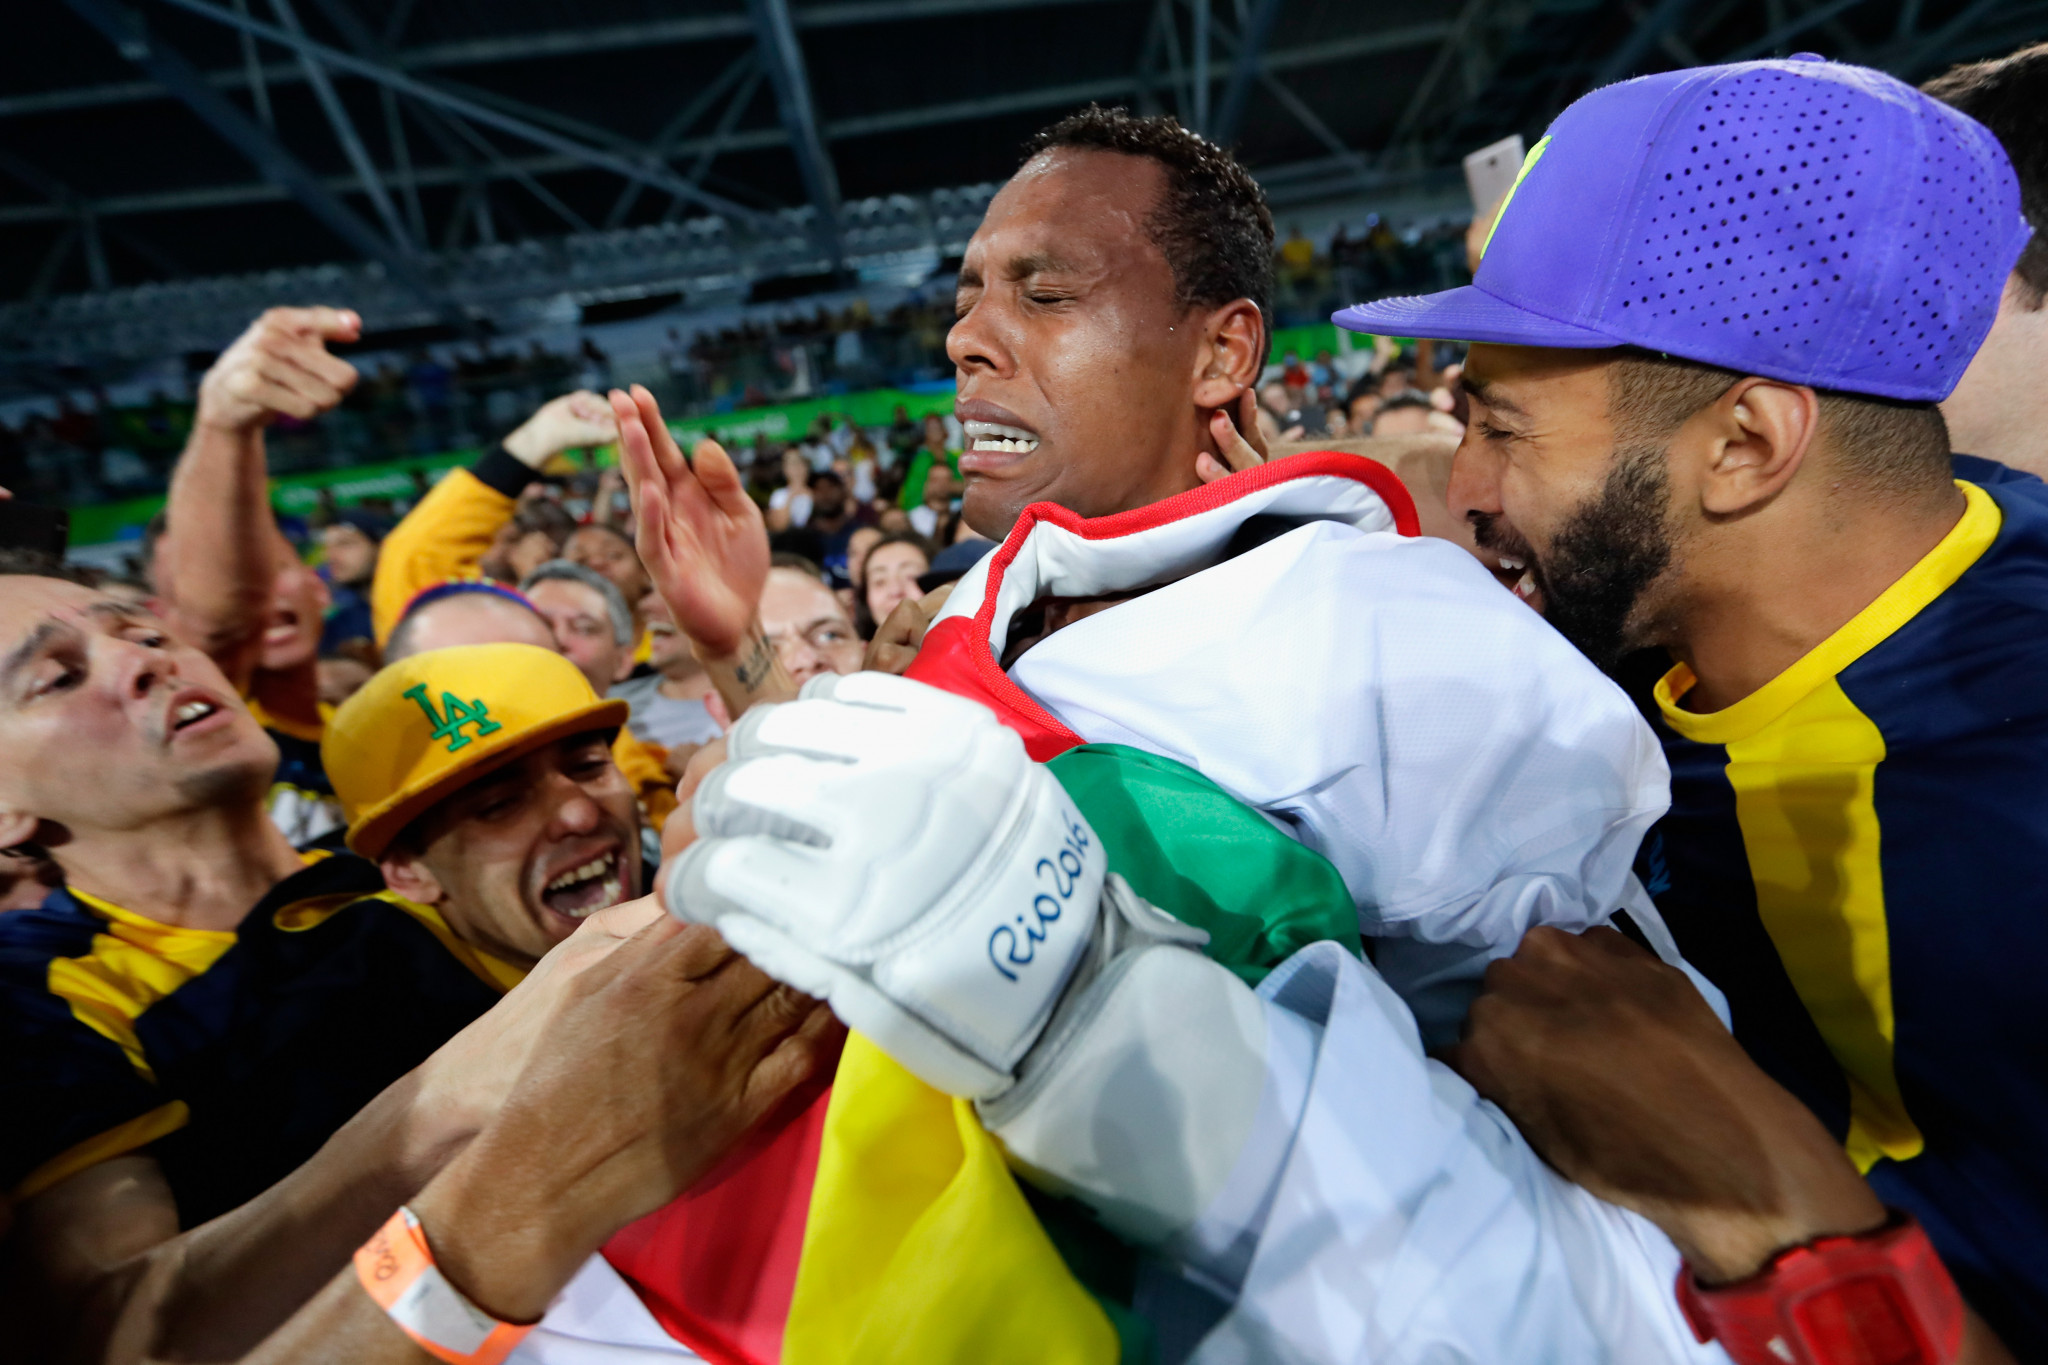 Maicon de Andrade Siqueira is mobbed as he celebrates a medal at his home Olympics ©Getty Images